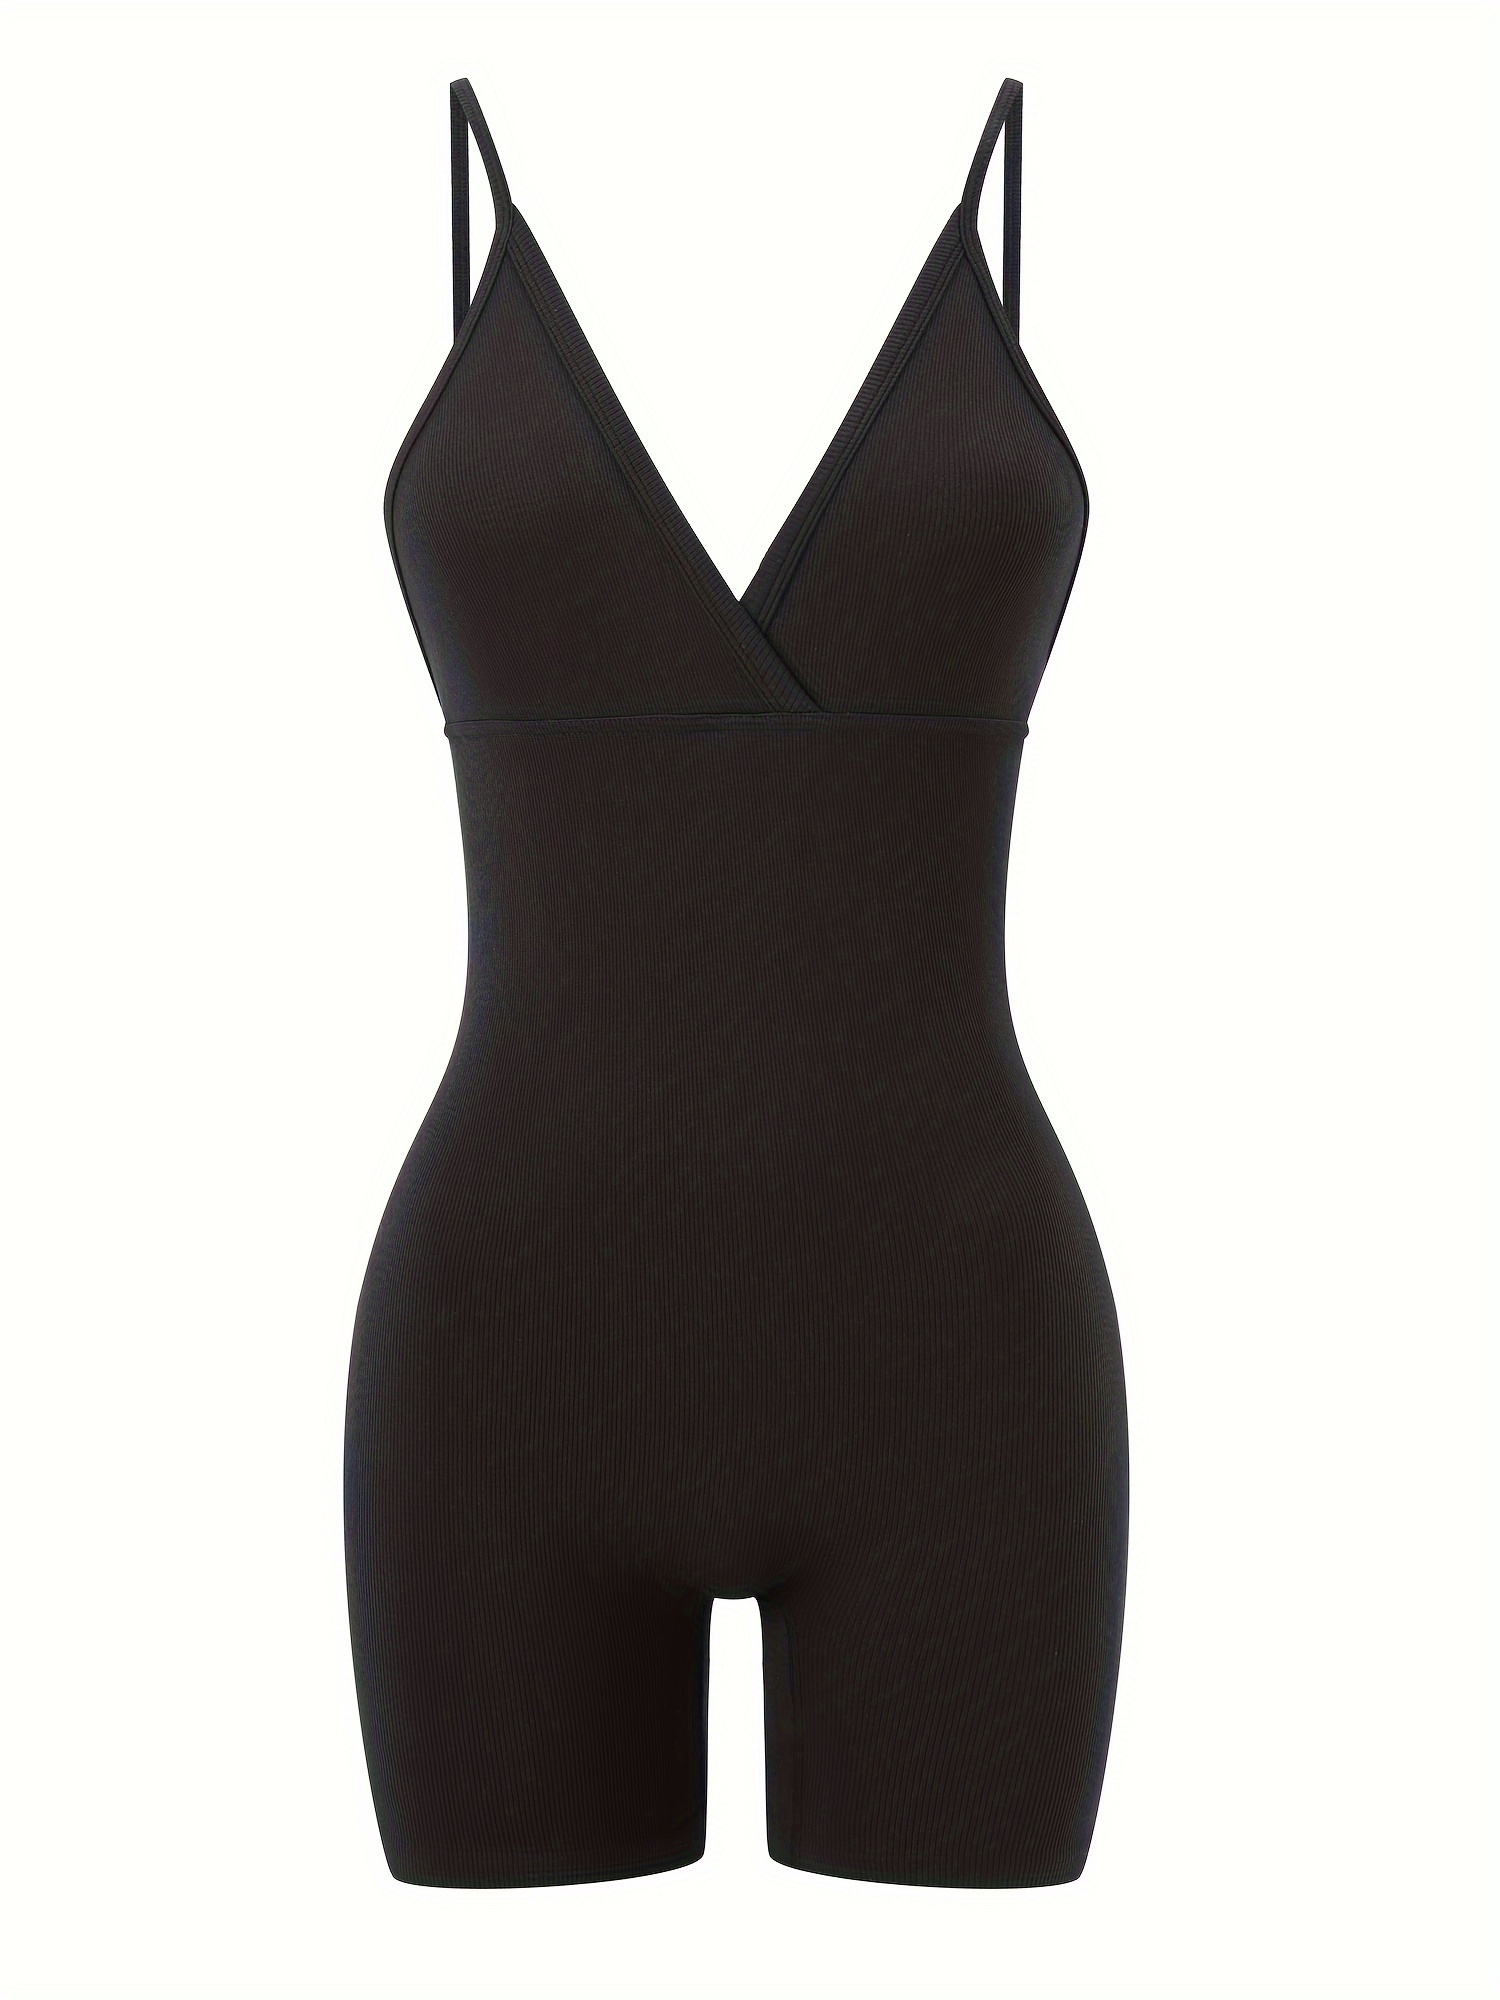 Womens Sleeveless Biker Black Seamless Jumpsuit With Tummy Control For  Yoga, Gym, And Workouts From Vonwafer, $13.12